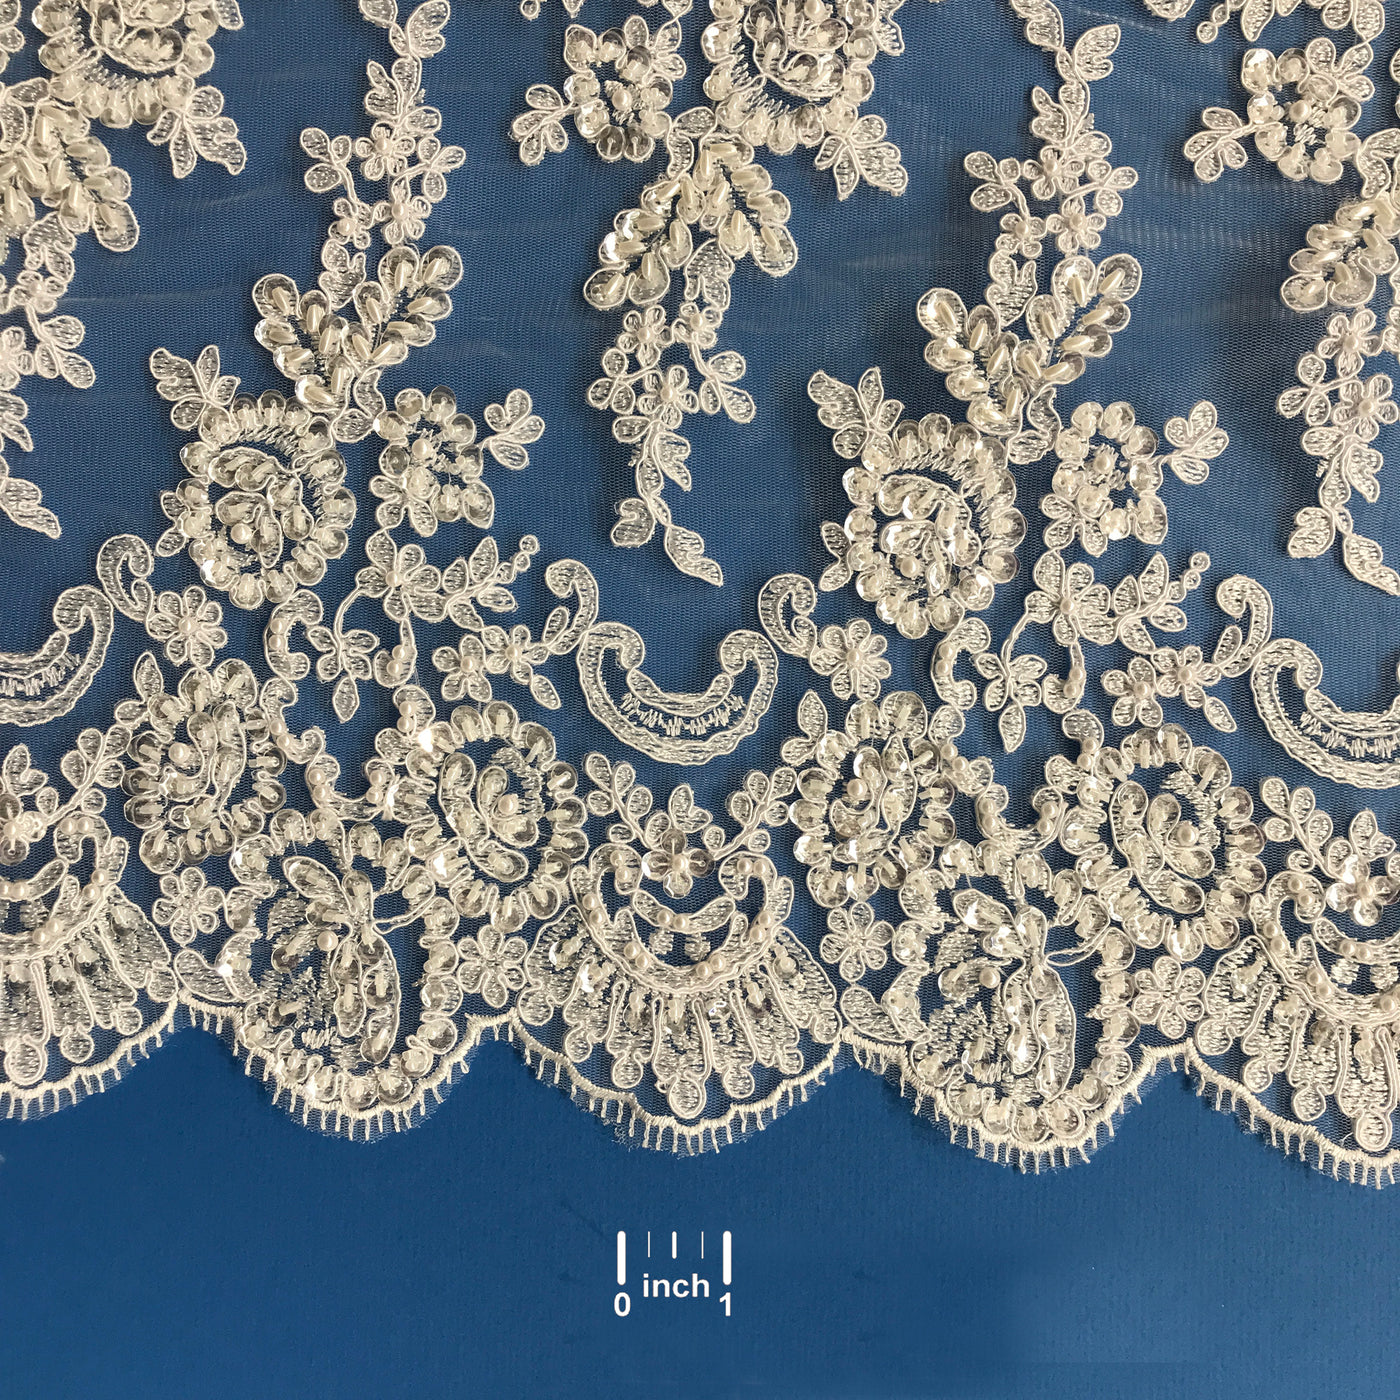 Beaded & Corded Double Sided Floral Lace Trimming Embroidered on 100% Polyester Net Mesh | Lace USA - 96851W-BP/2